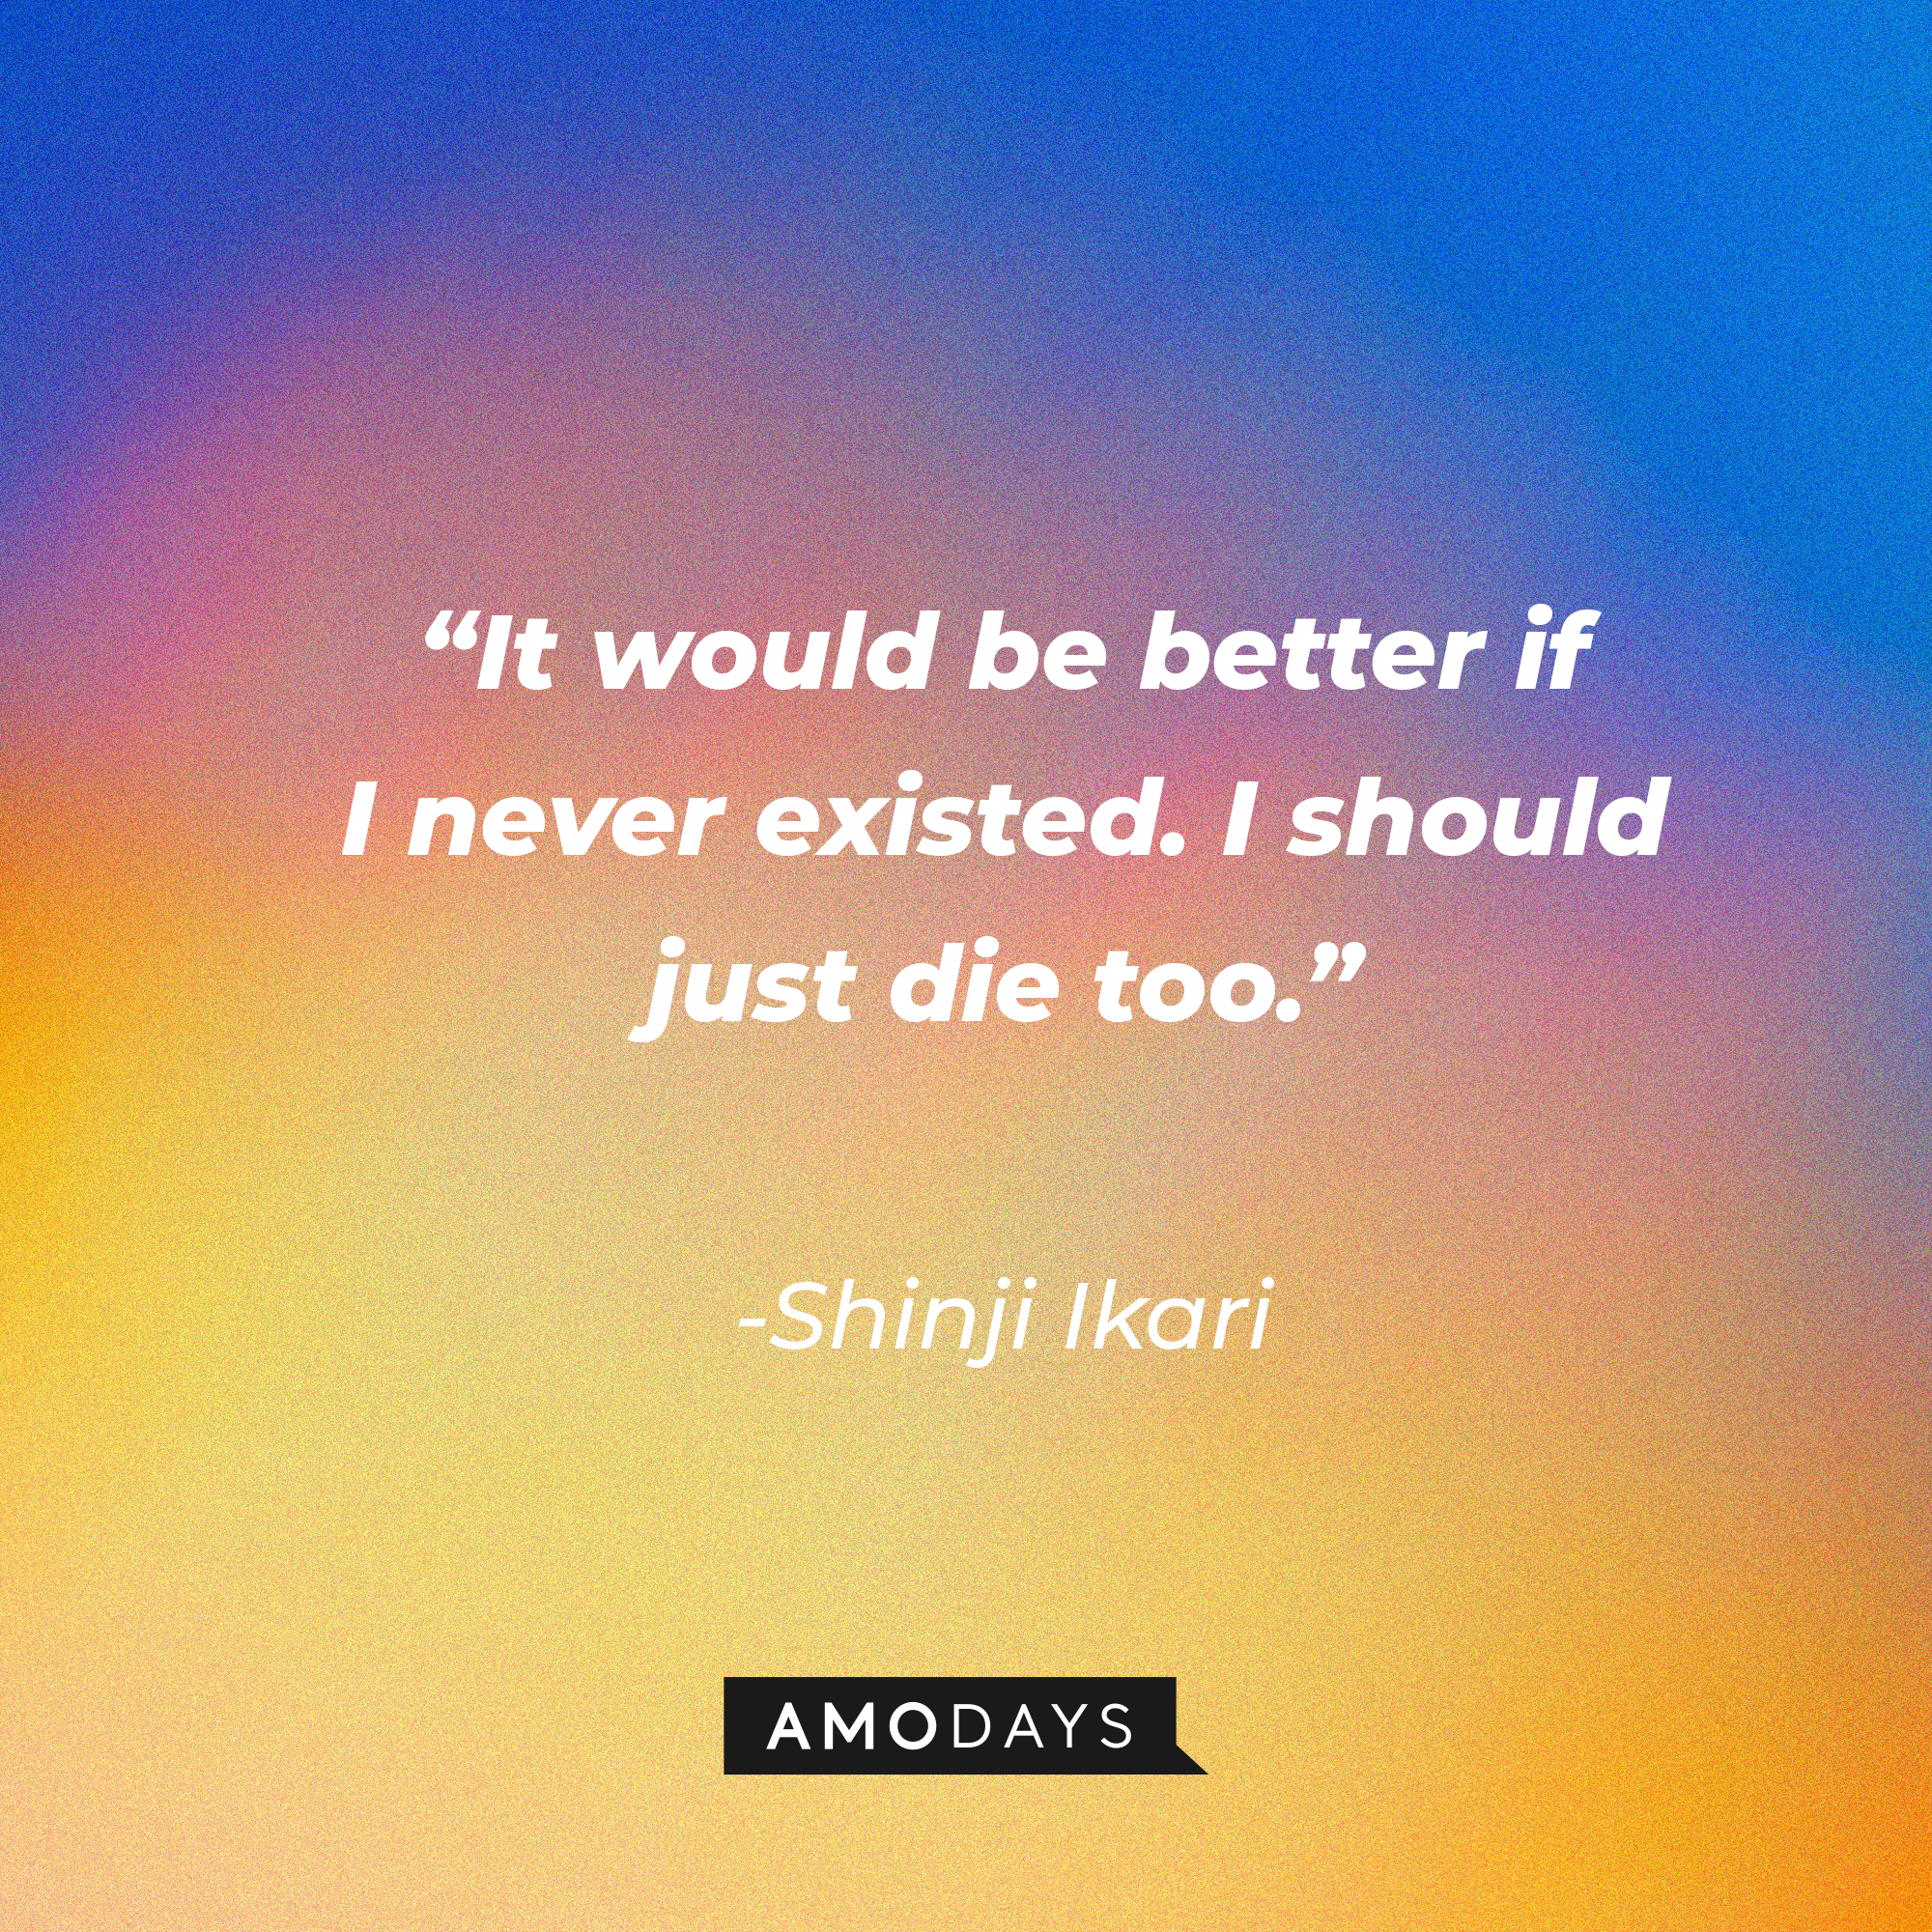 Shinji Ikari’s quote: “It would be better if I never existed. I should just die too.” | Source: AmoDays